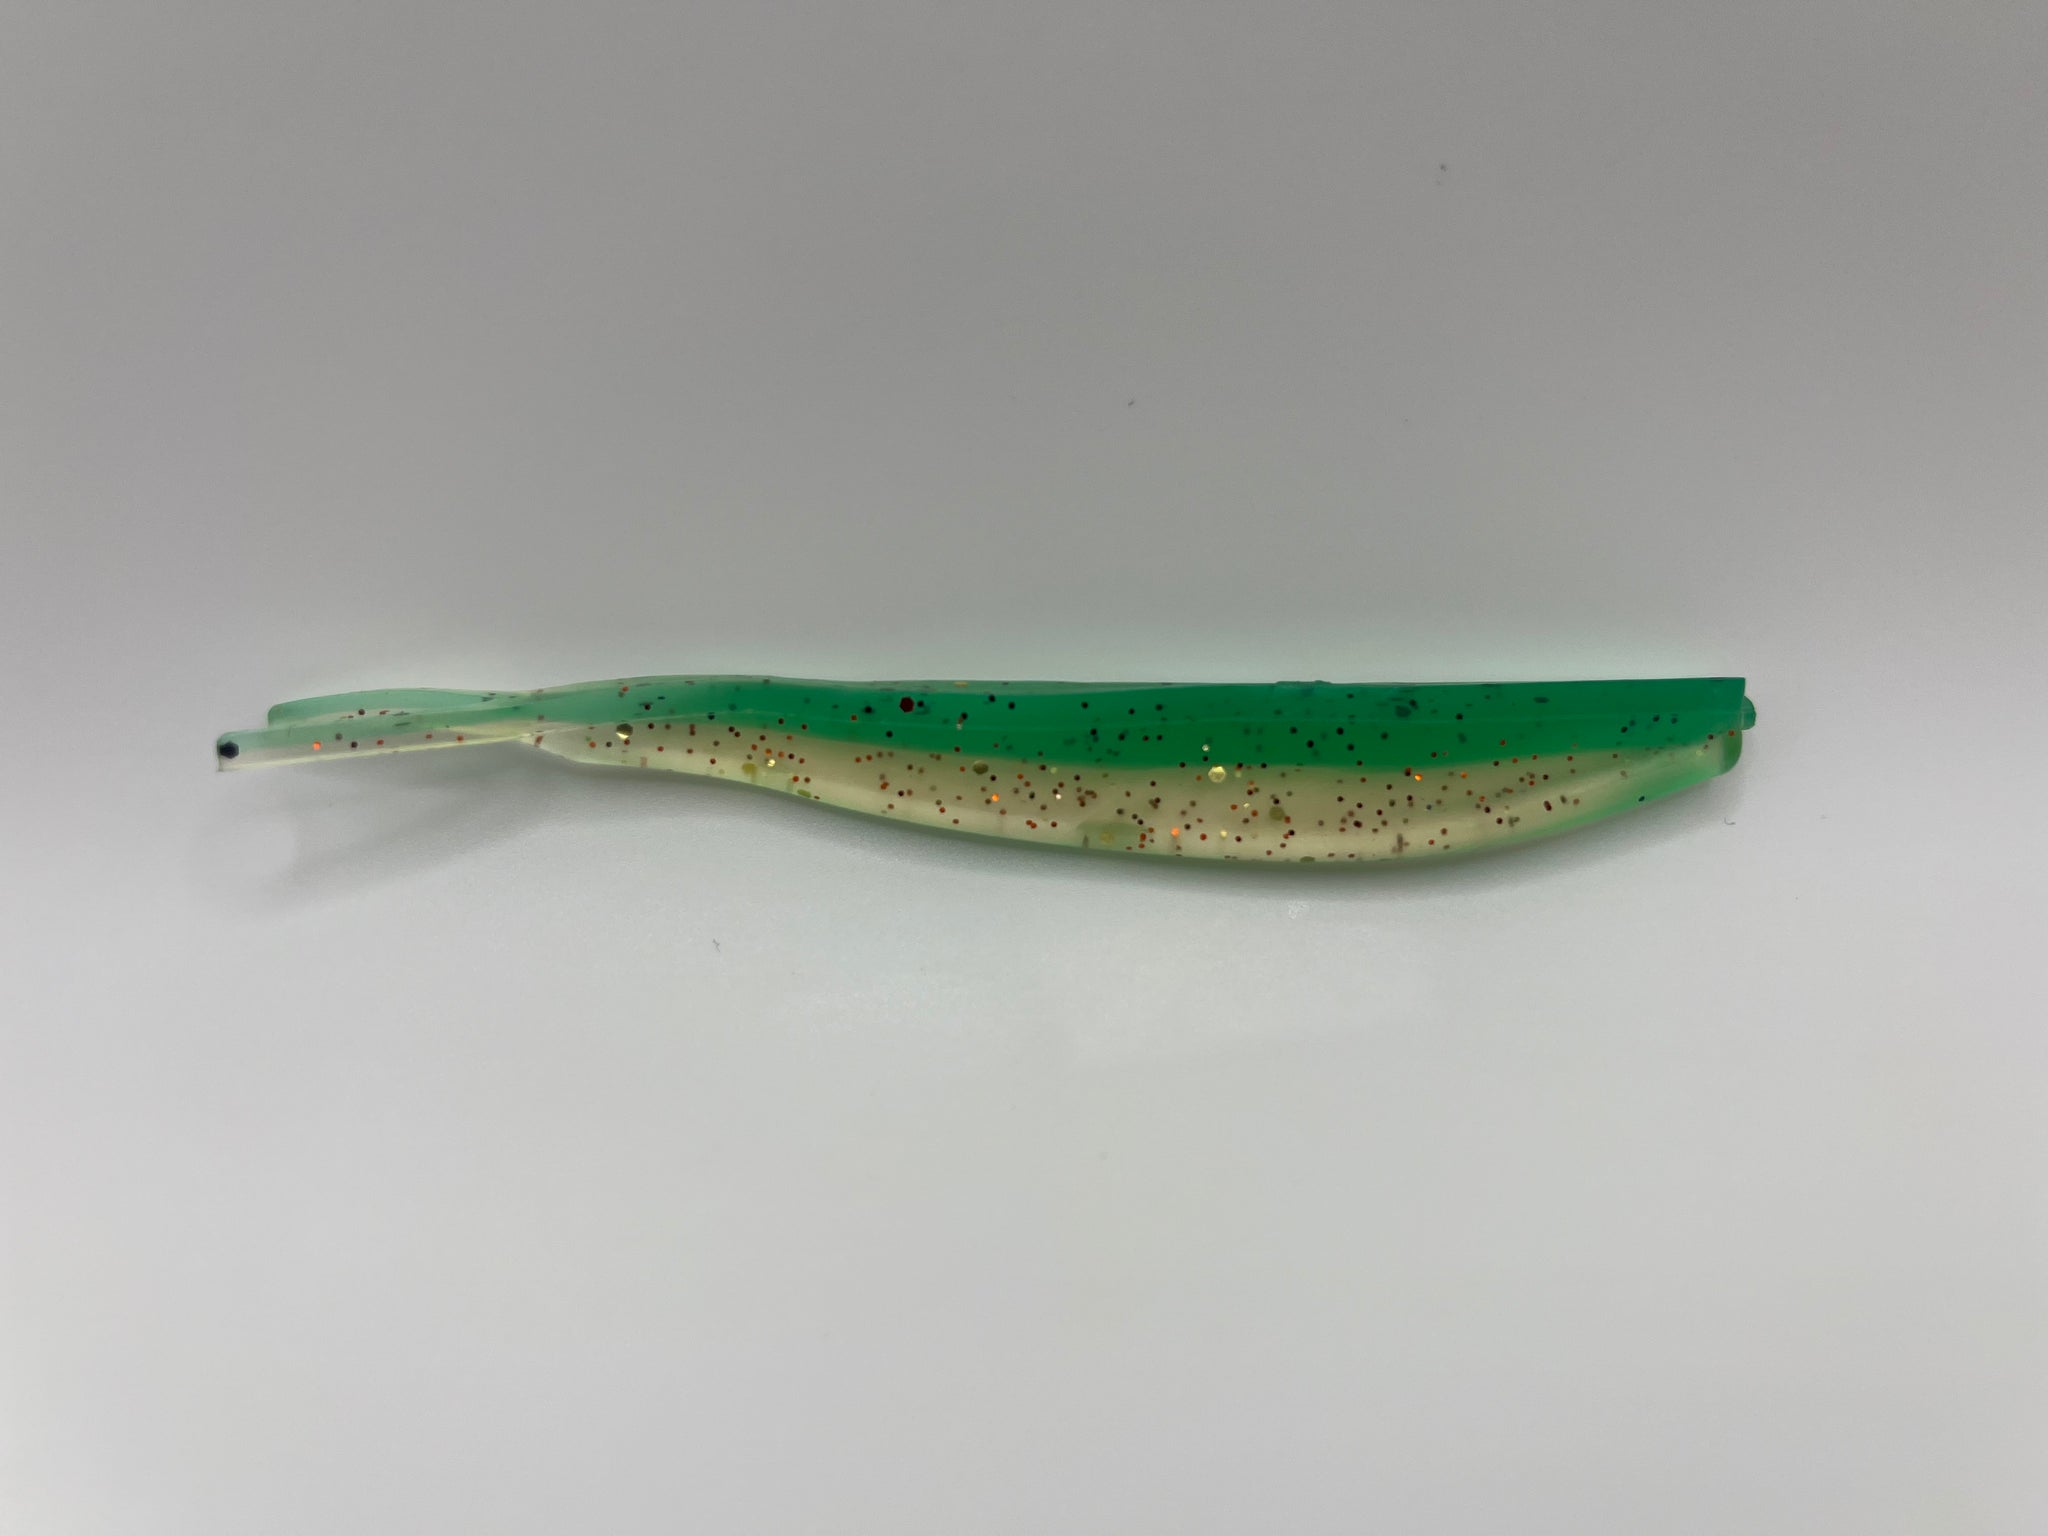 Painted Minnow Bait for Bass Fishing Freshwater  Saltwater(7.5cm/2.95in,4.7g/0.16oz,5 Colors Option)